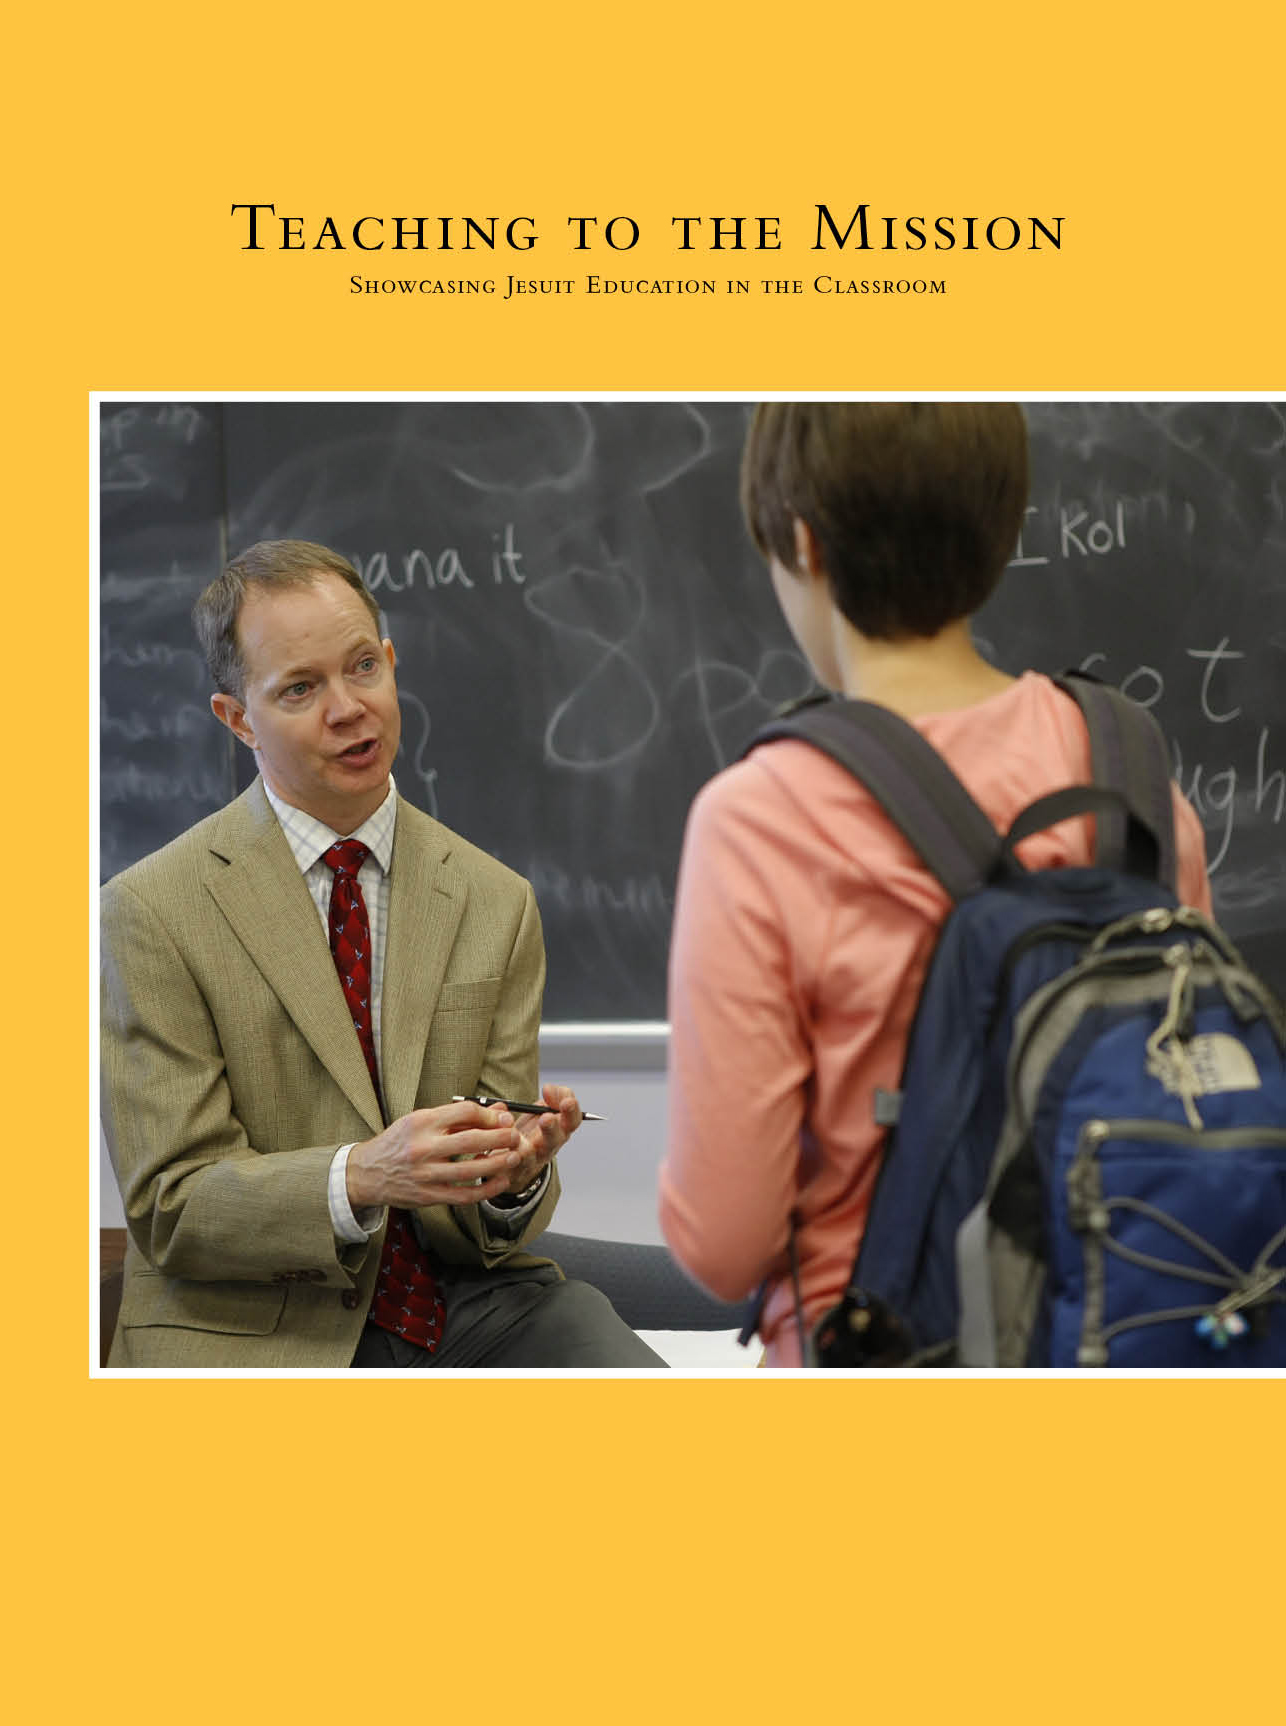 Cover of "Teaching to the Mission" publication